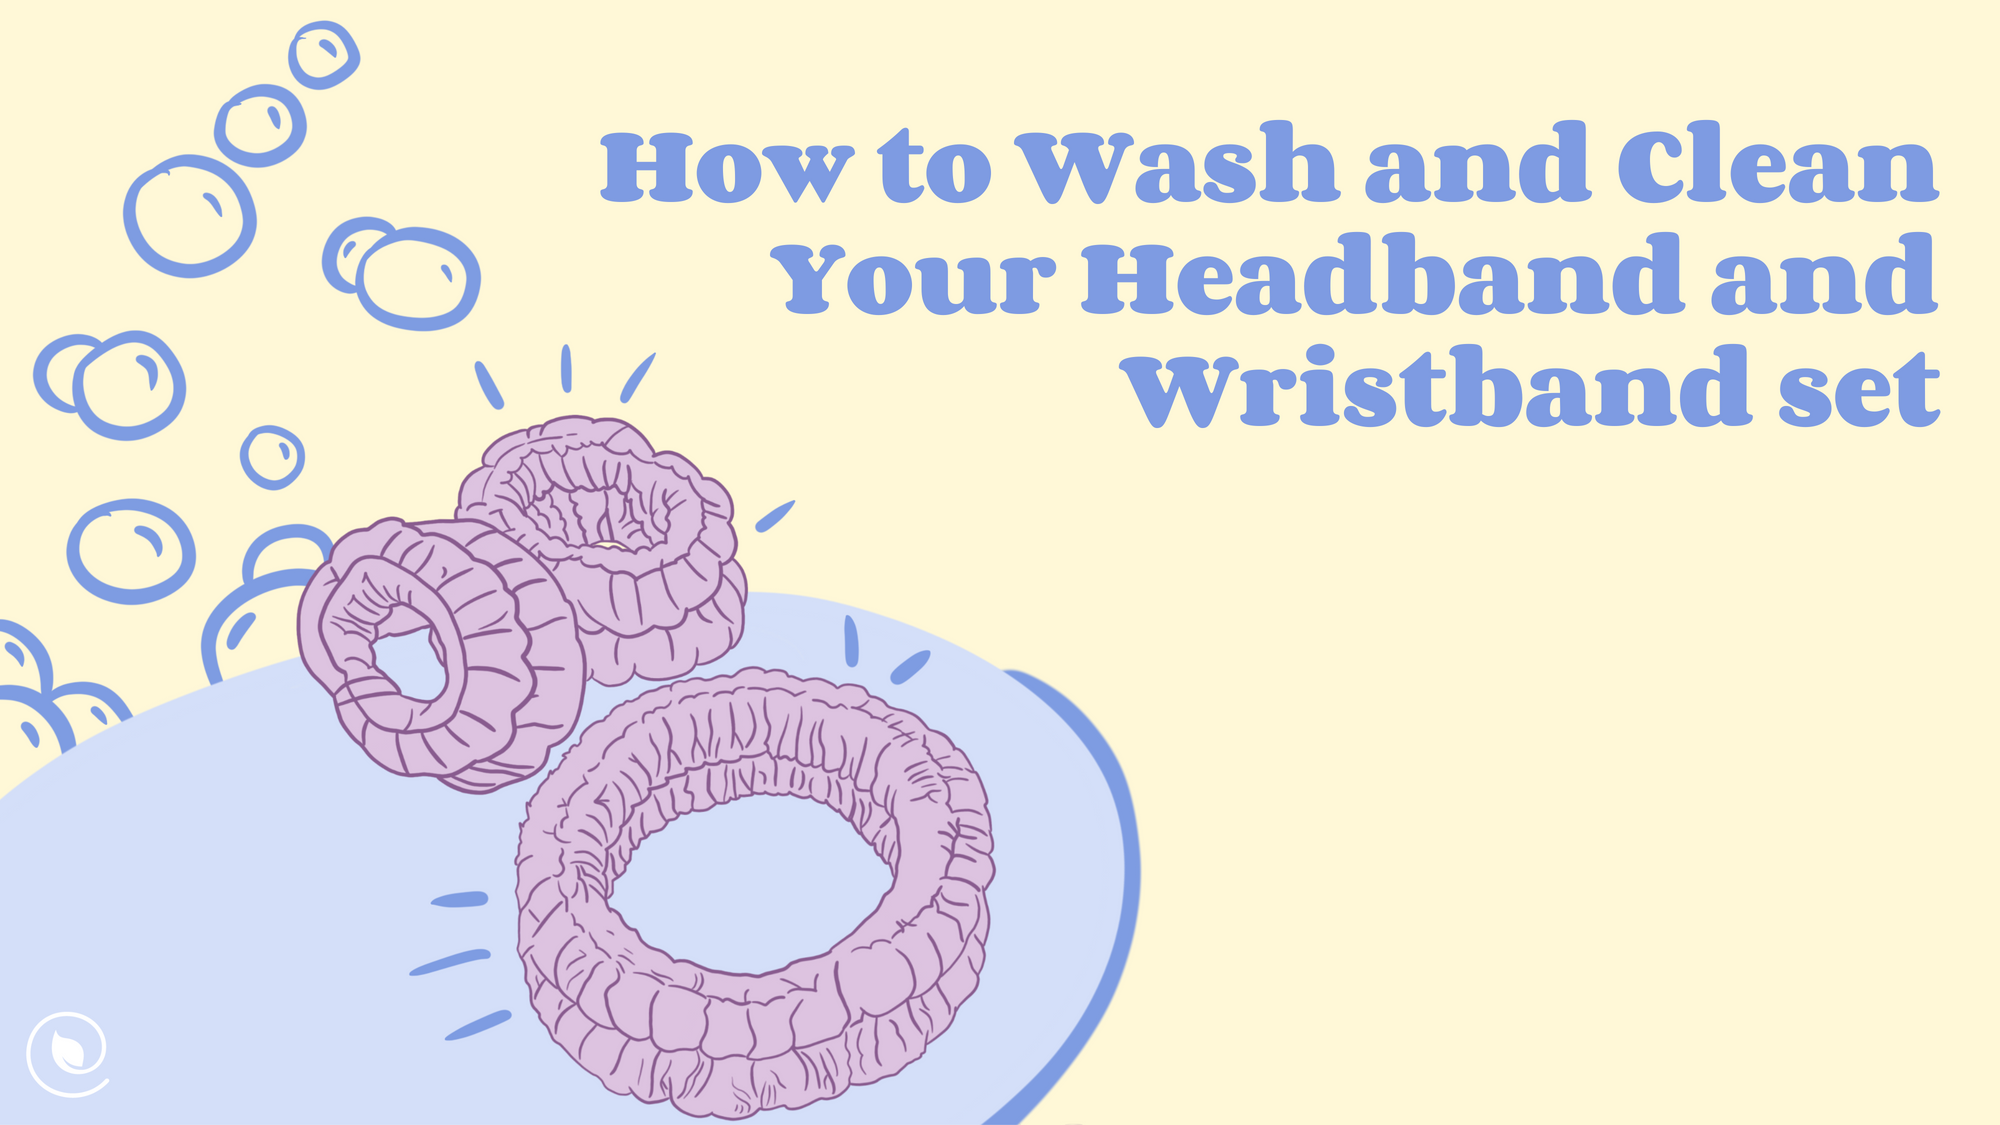 How to Wash and Clean Your Headband and Wristband set